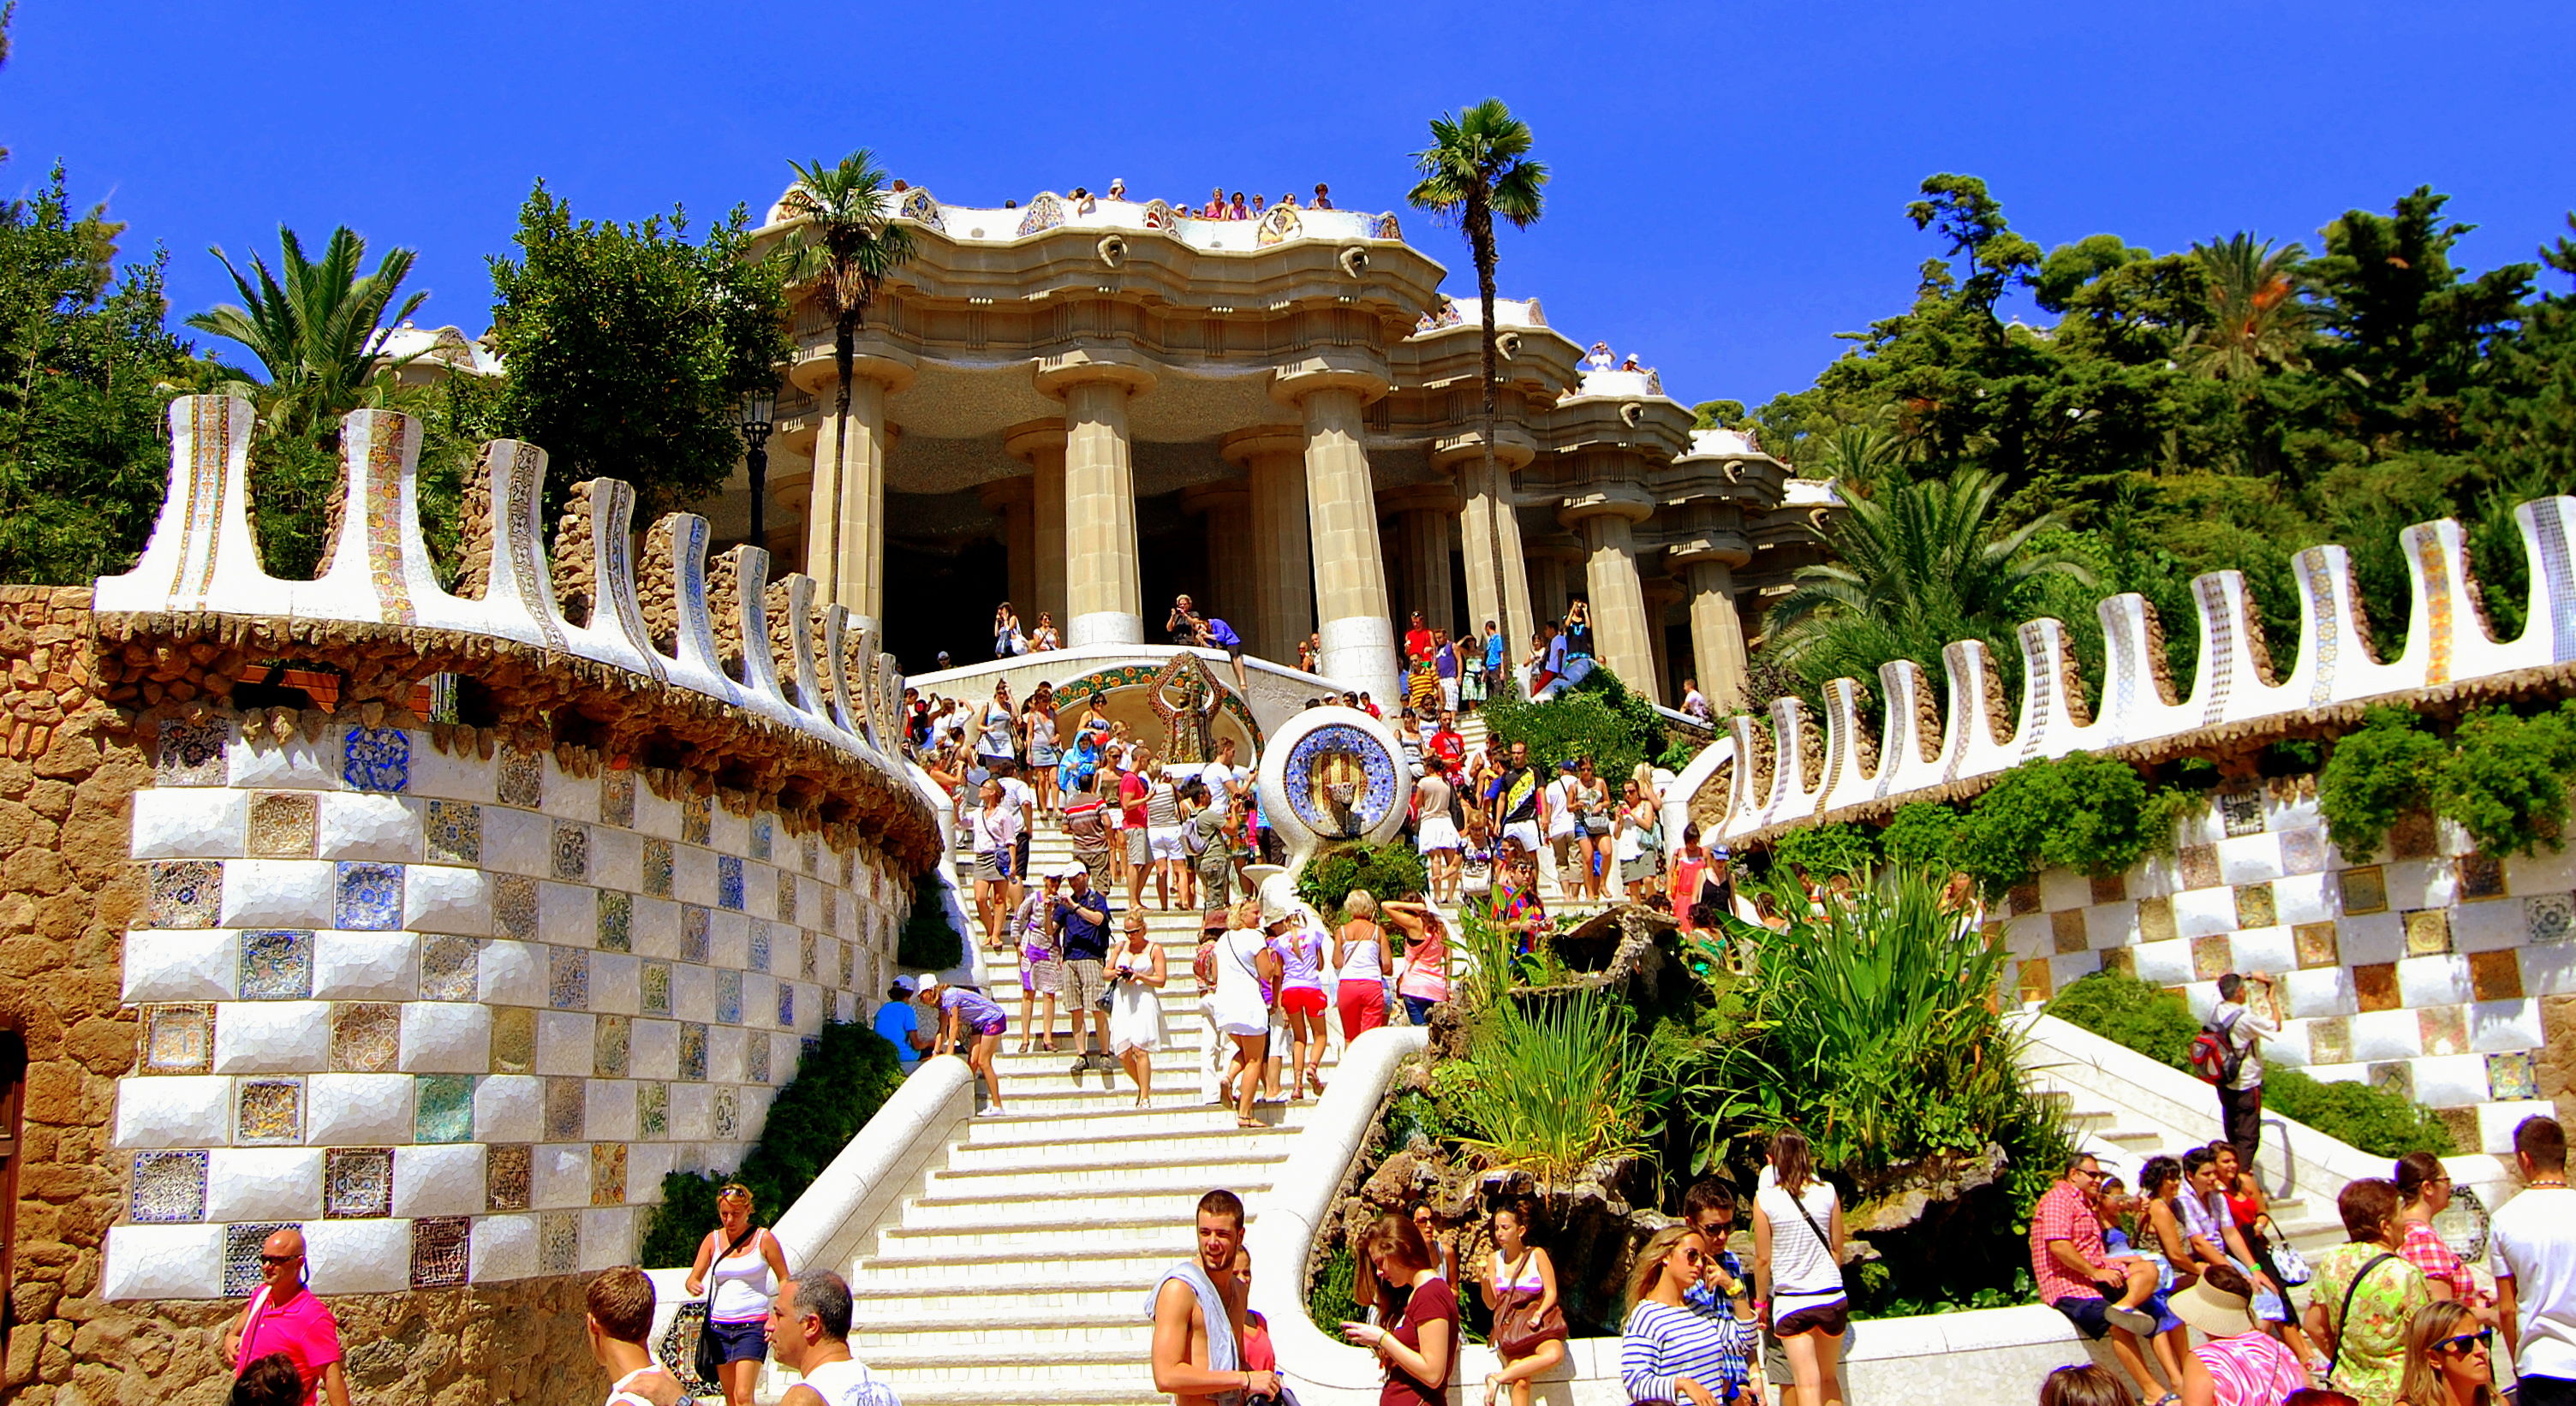 Park Guell symbolic staircase full of tourists